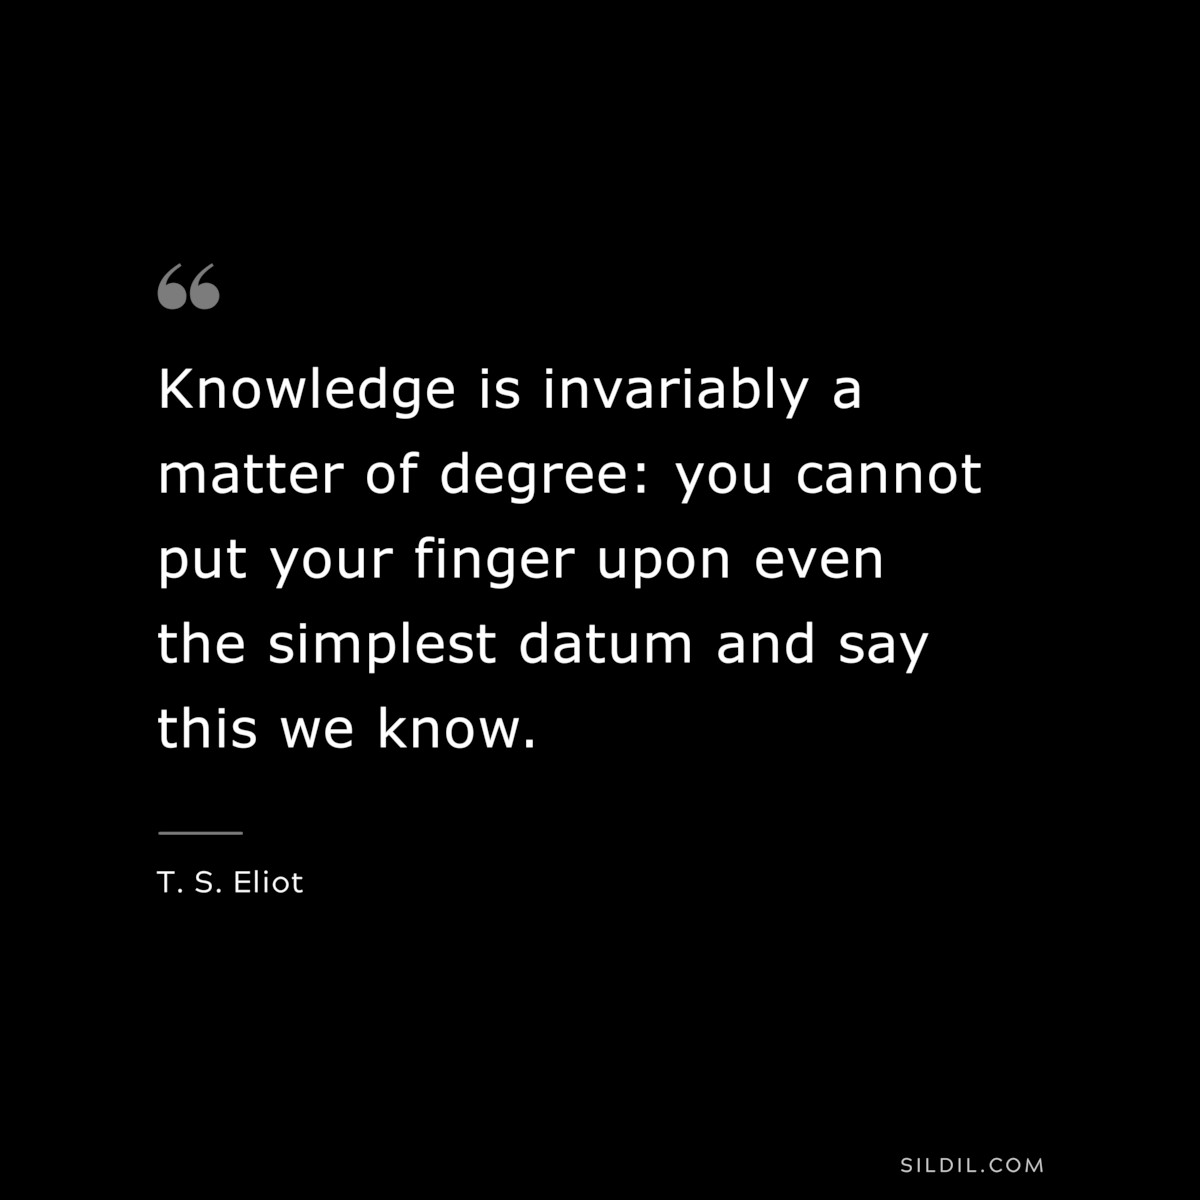 Knowledge is invariably a matter of degree: you cannot put your finger upon even the simplest datum and say this we know. ― T. S. Eliot